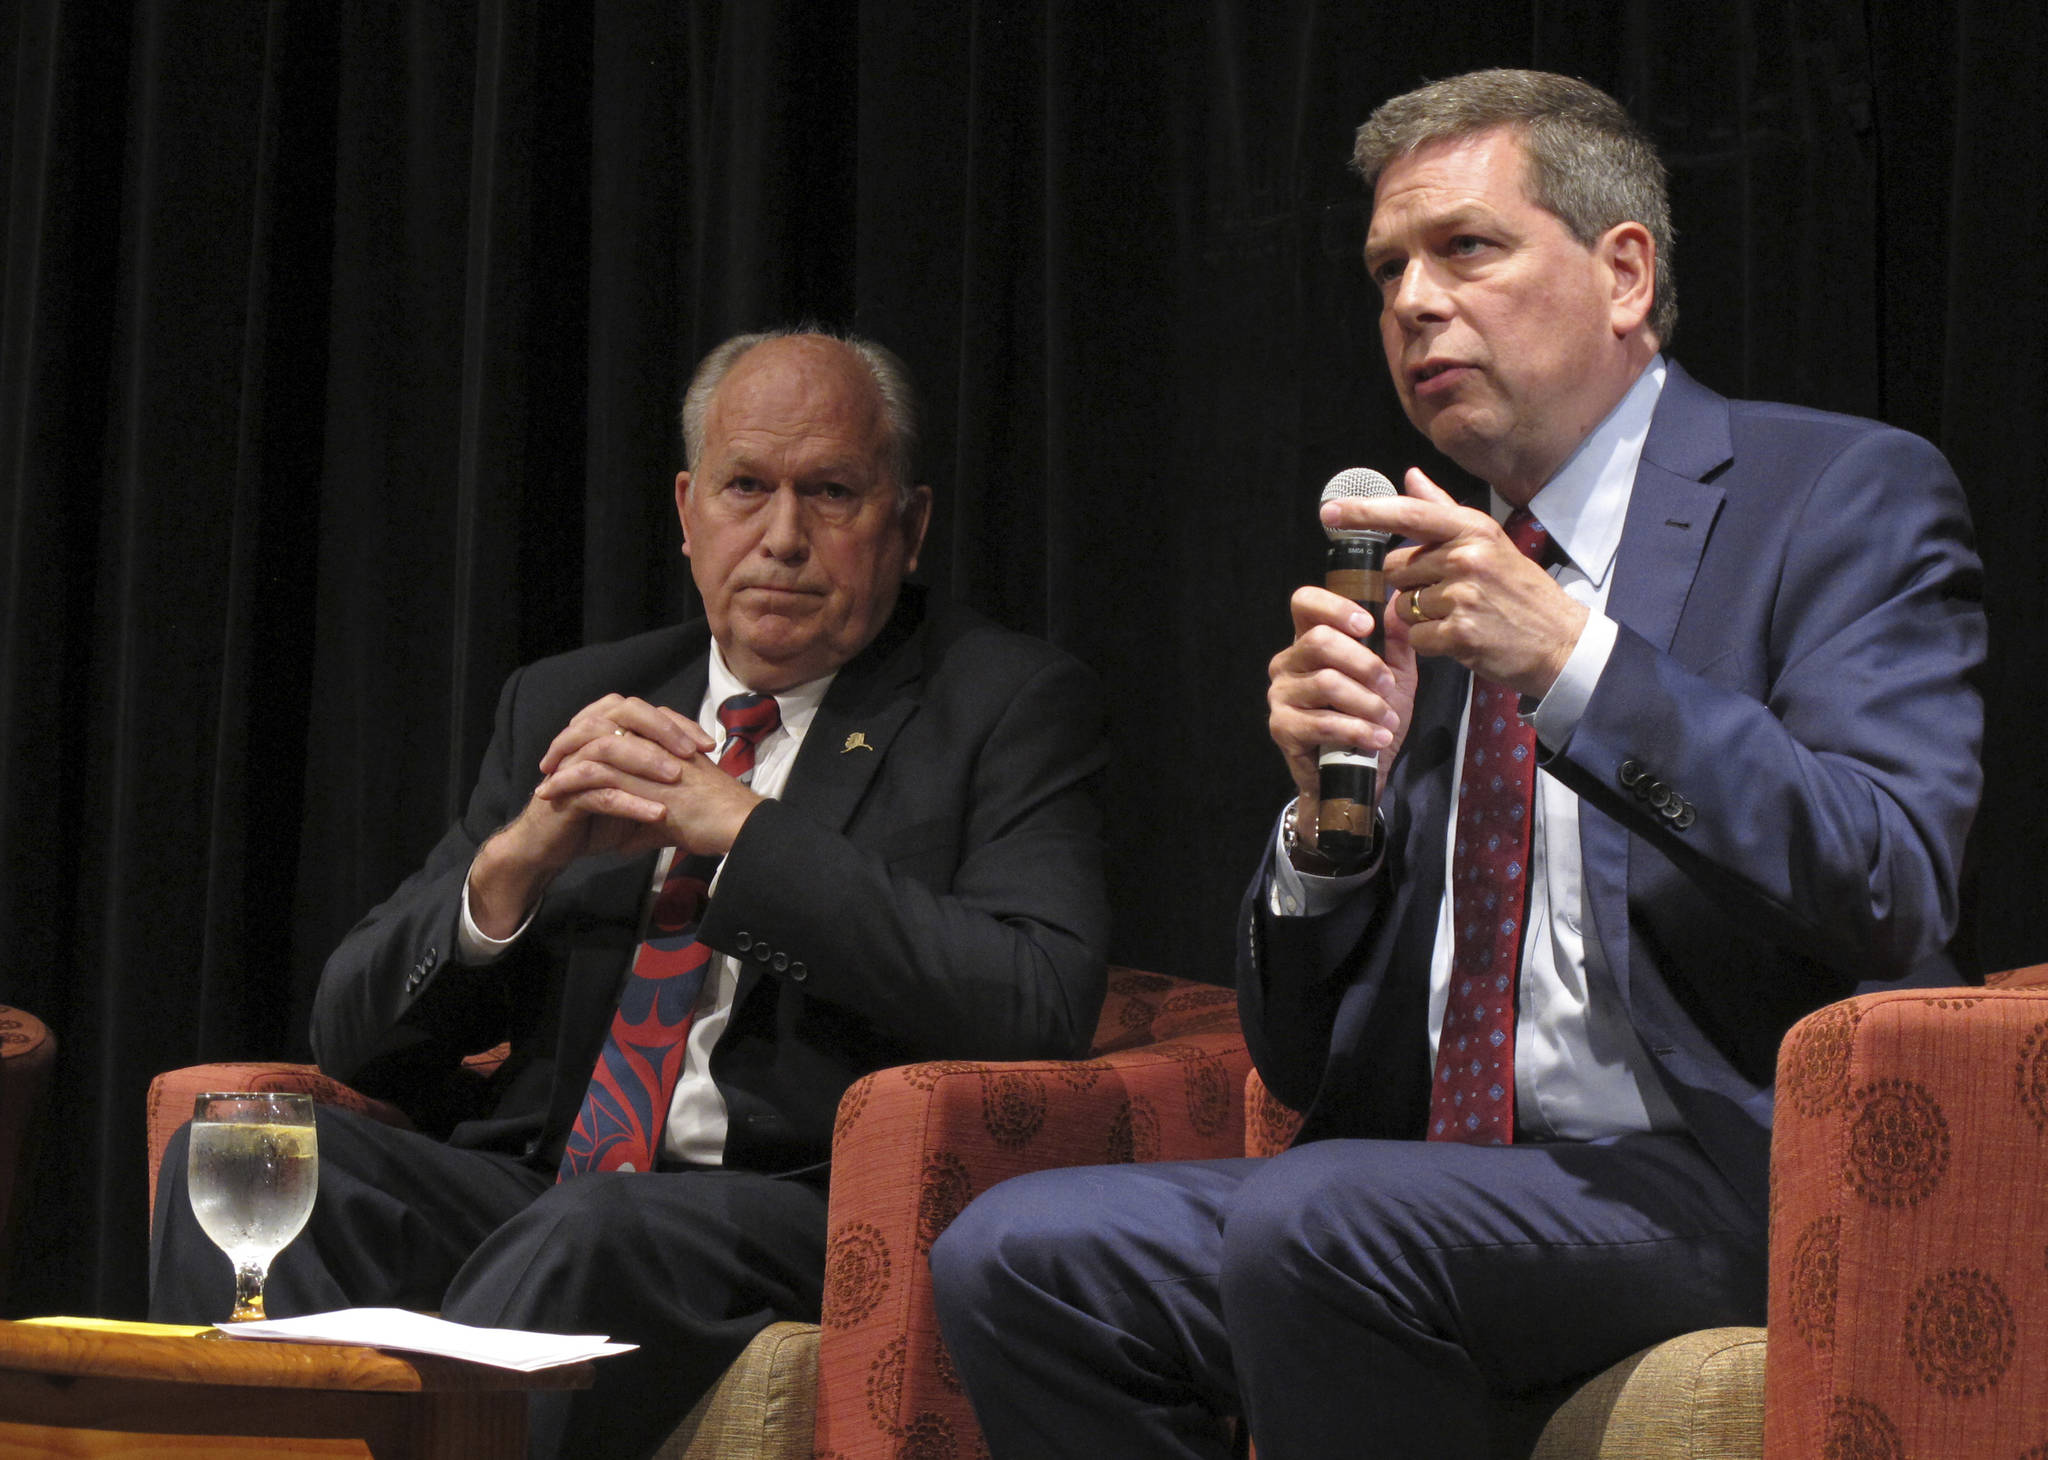 Democratic nominee for governor in Alaska, Mark Begich, speaks during a chamber of commerce gubernatorial candidate forum on Thursday, Sept. 6, 2018, in Juneau, Alaska, as Gov. Bill Walker, left, looks on. The forum featured the three major candidates in the race, including Republican nominee Mike Dunleavy, who is not pictured. (AP Photo/Becky Bohrer)